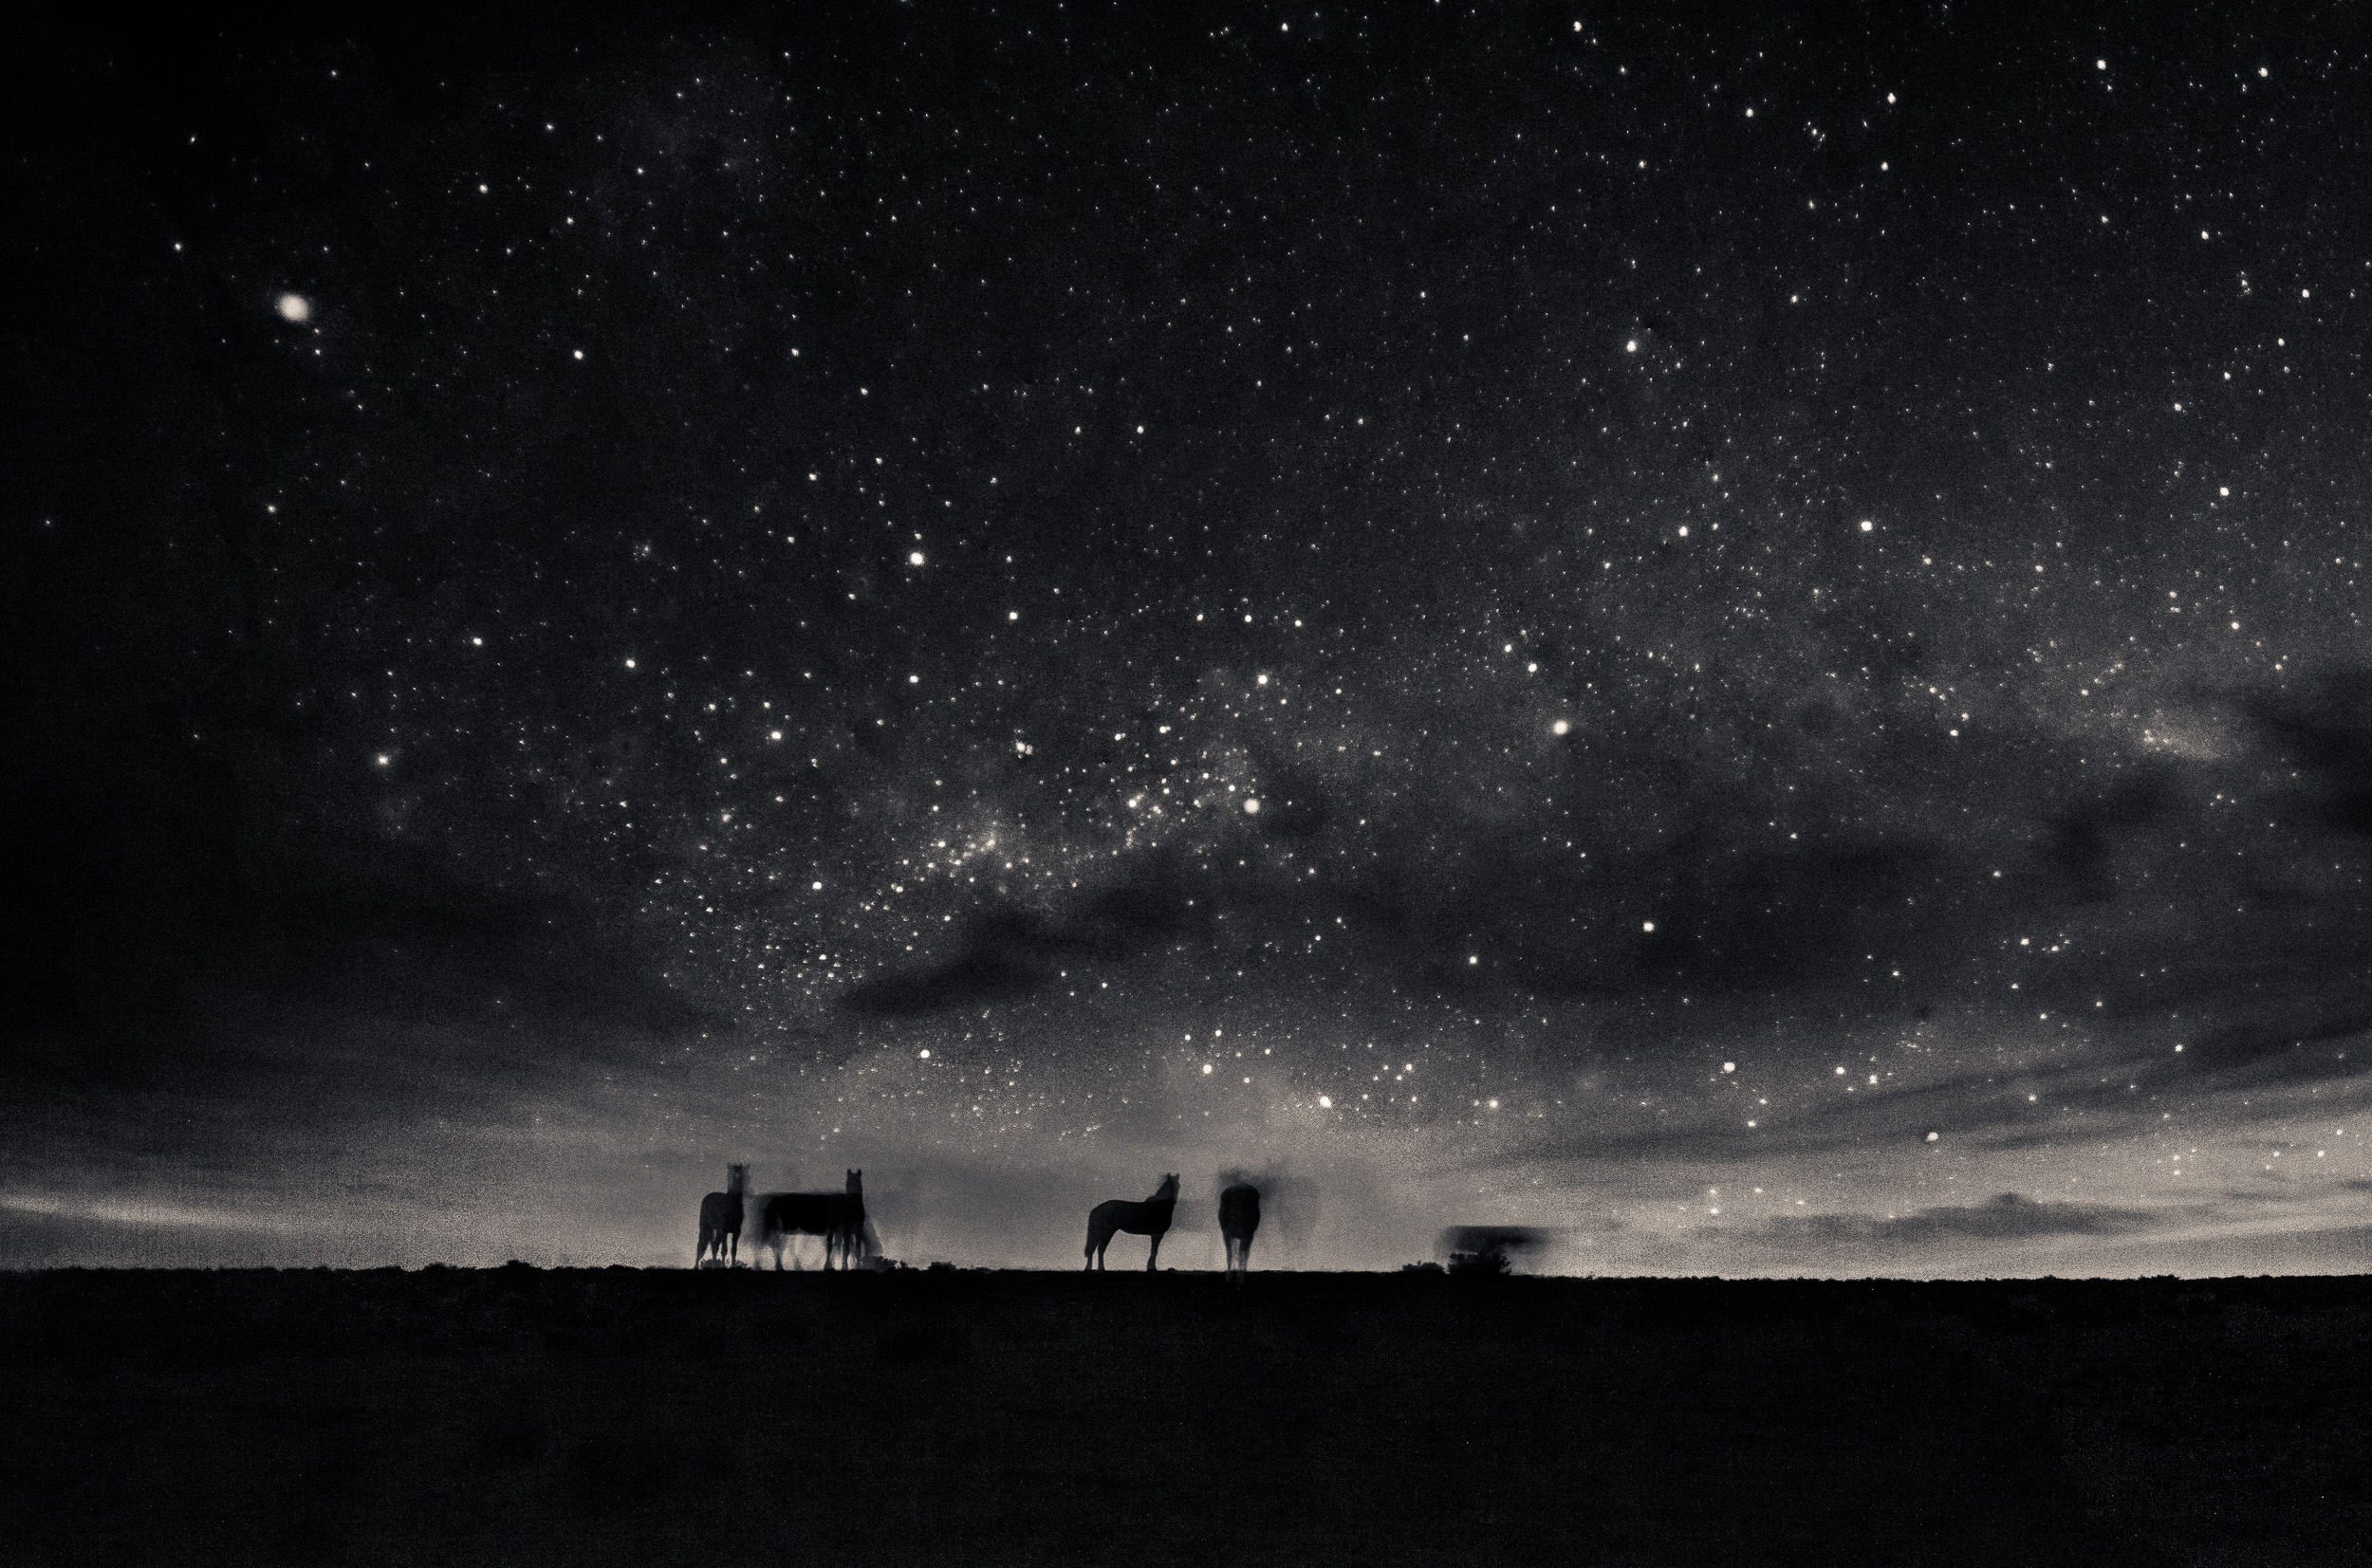 Shadowy silhouettes of Patagonian horses against a starry night sky